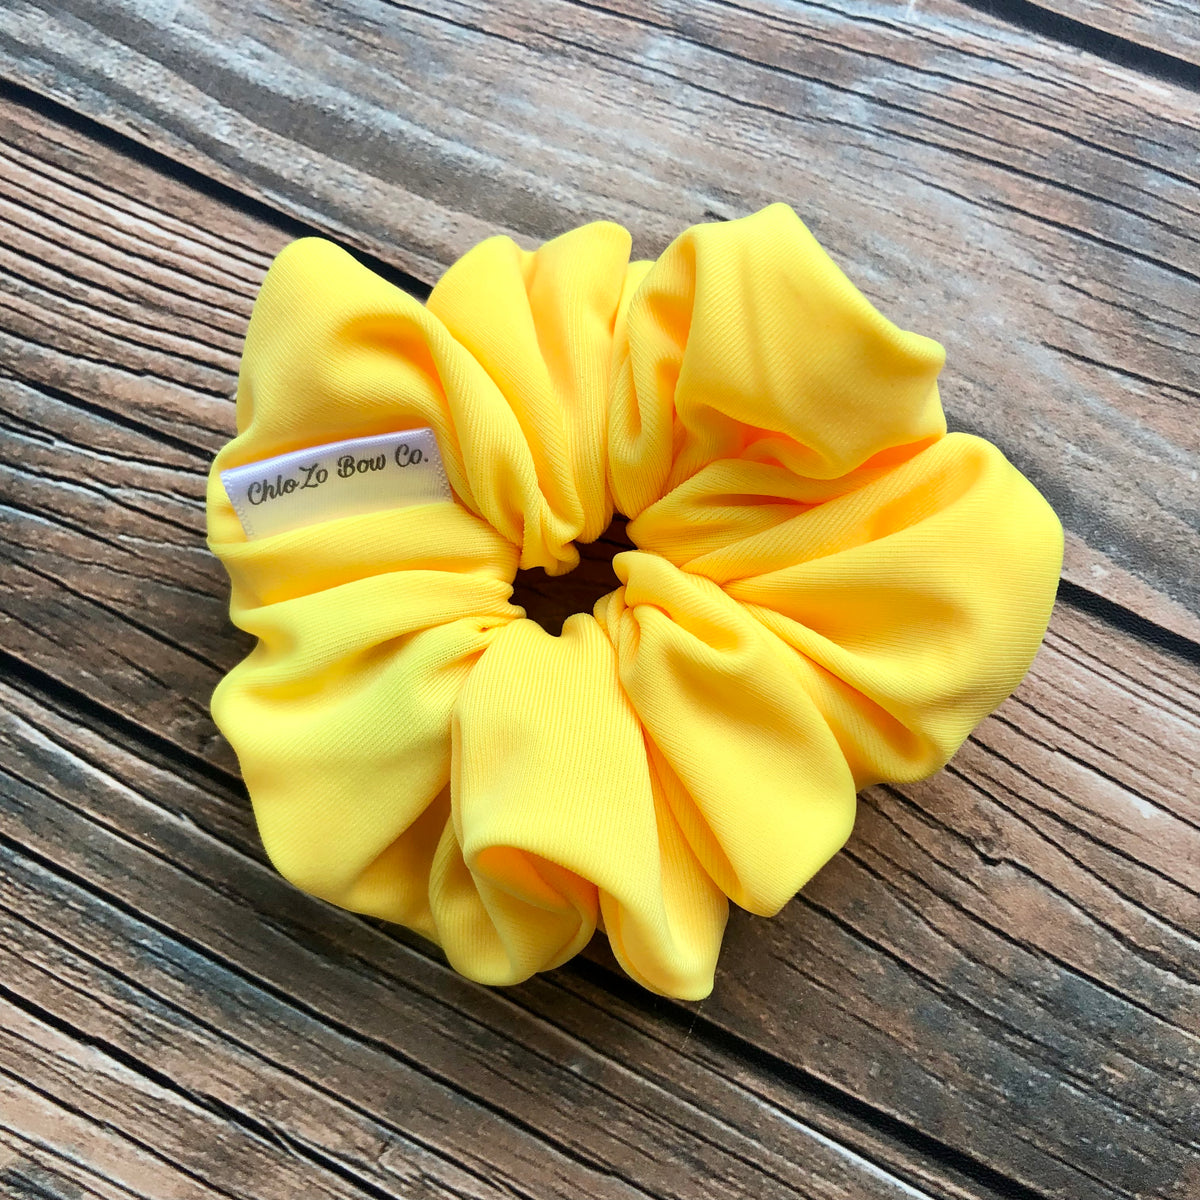 The Swim Collections: Scrunchies